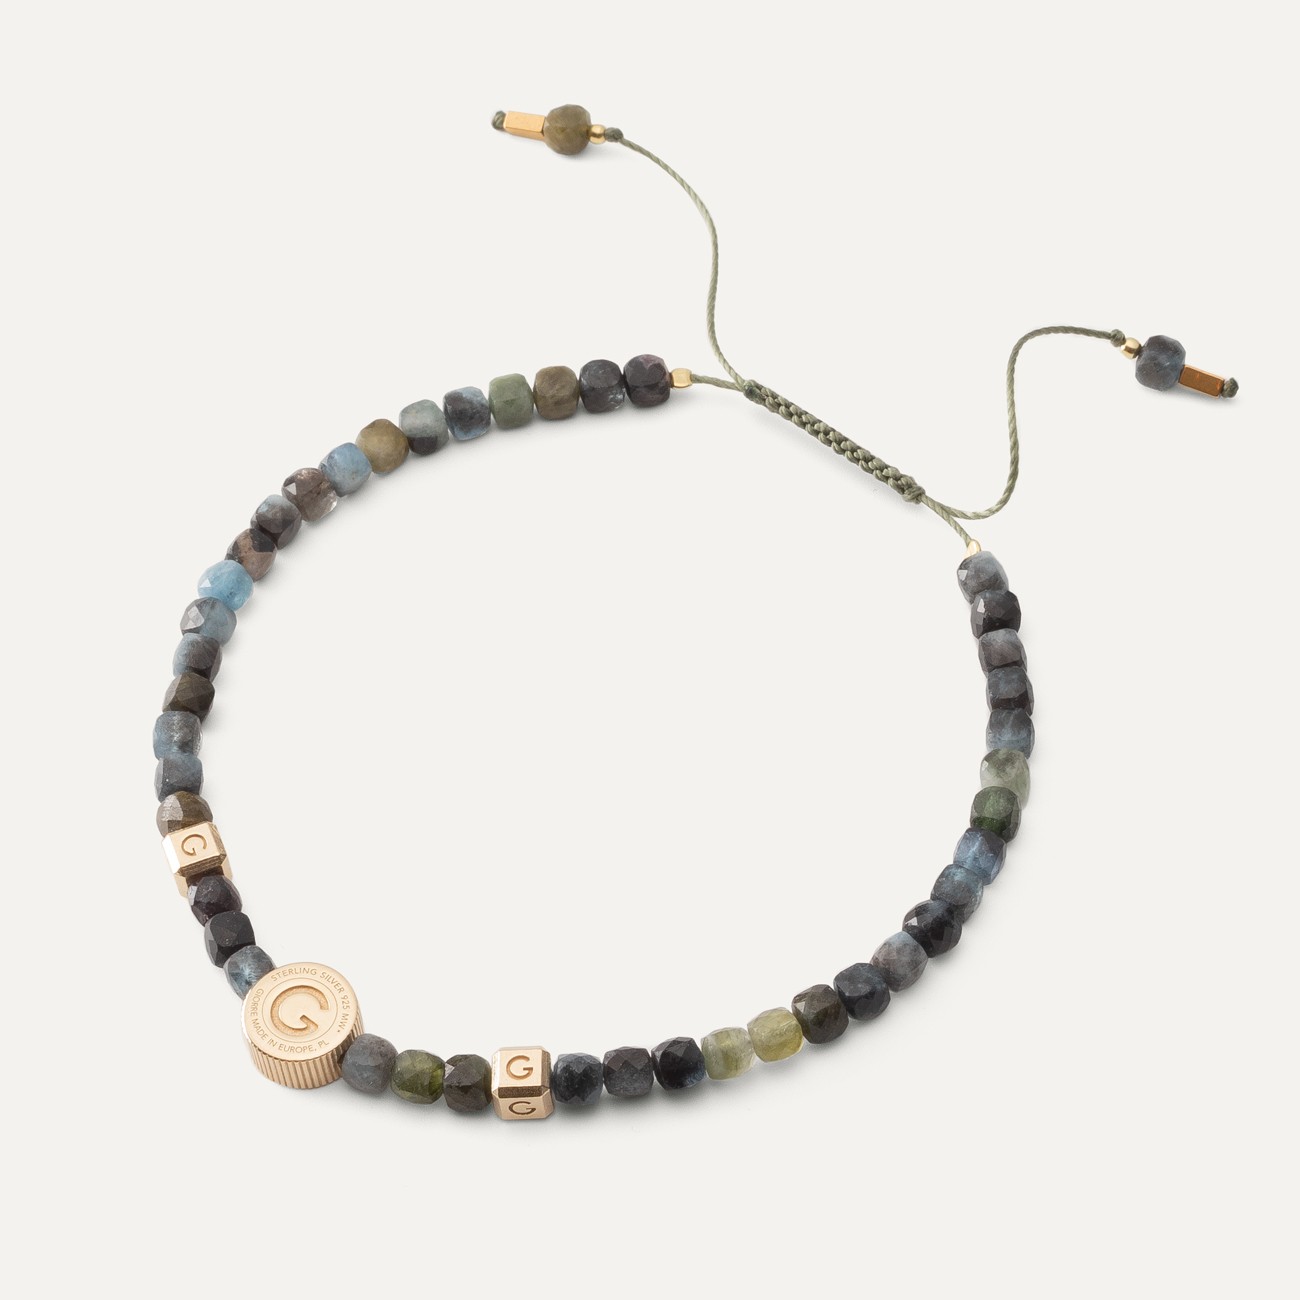 Silver anklet with natural stone - multicolored aquamarine